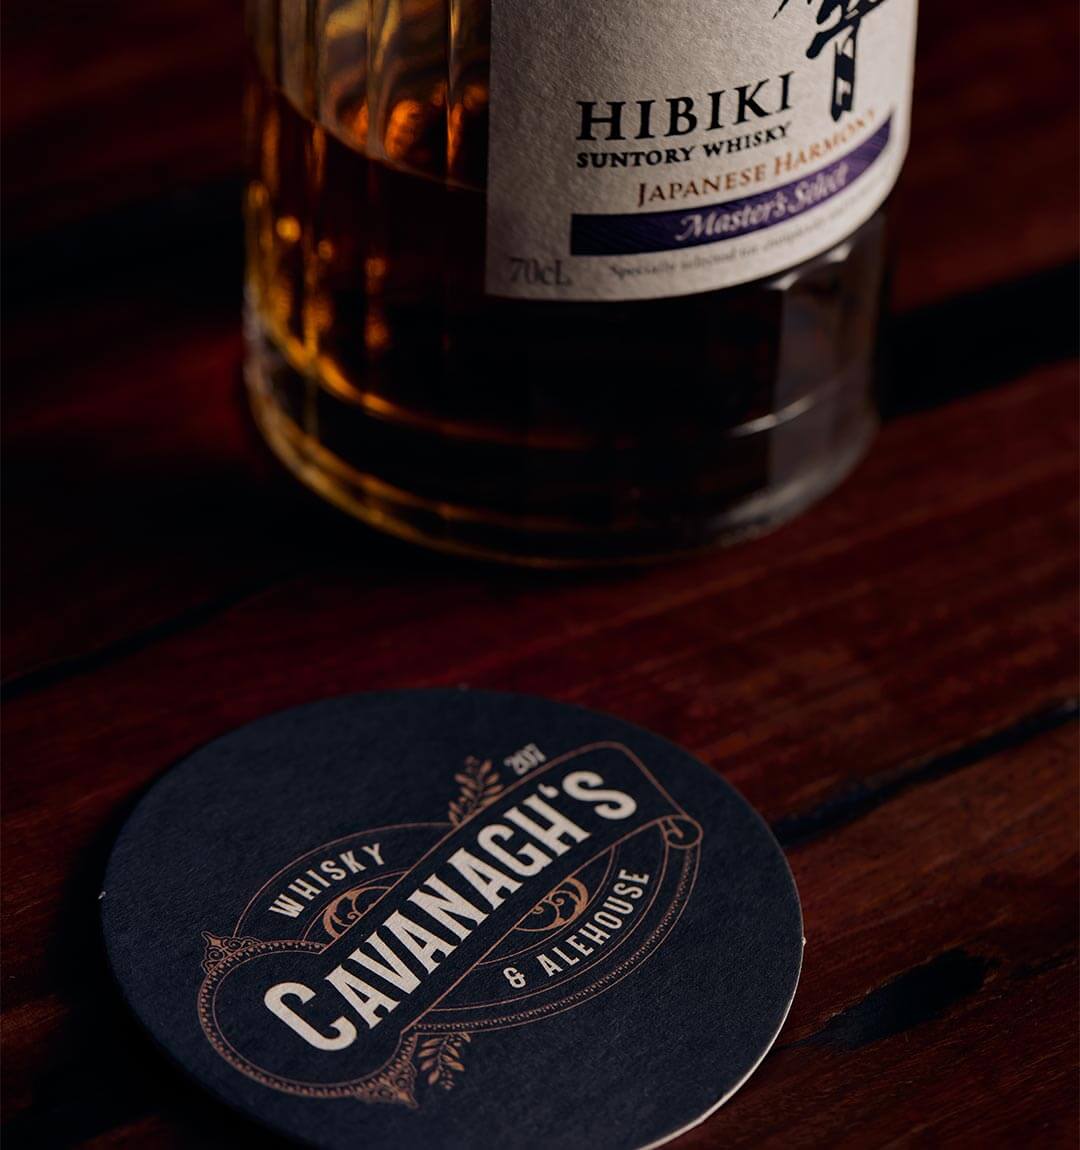 A Cavanagh's Whisky and Alehouse beer mat placed on a wooden bar next to a Hibiki bottle of Whisky.